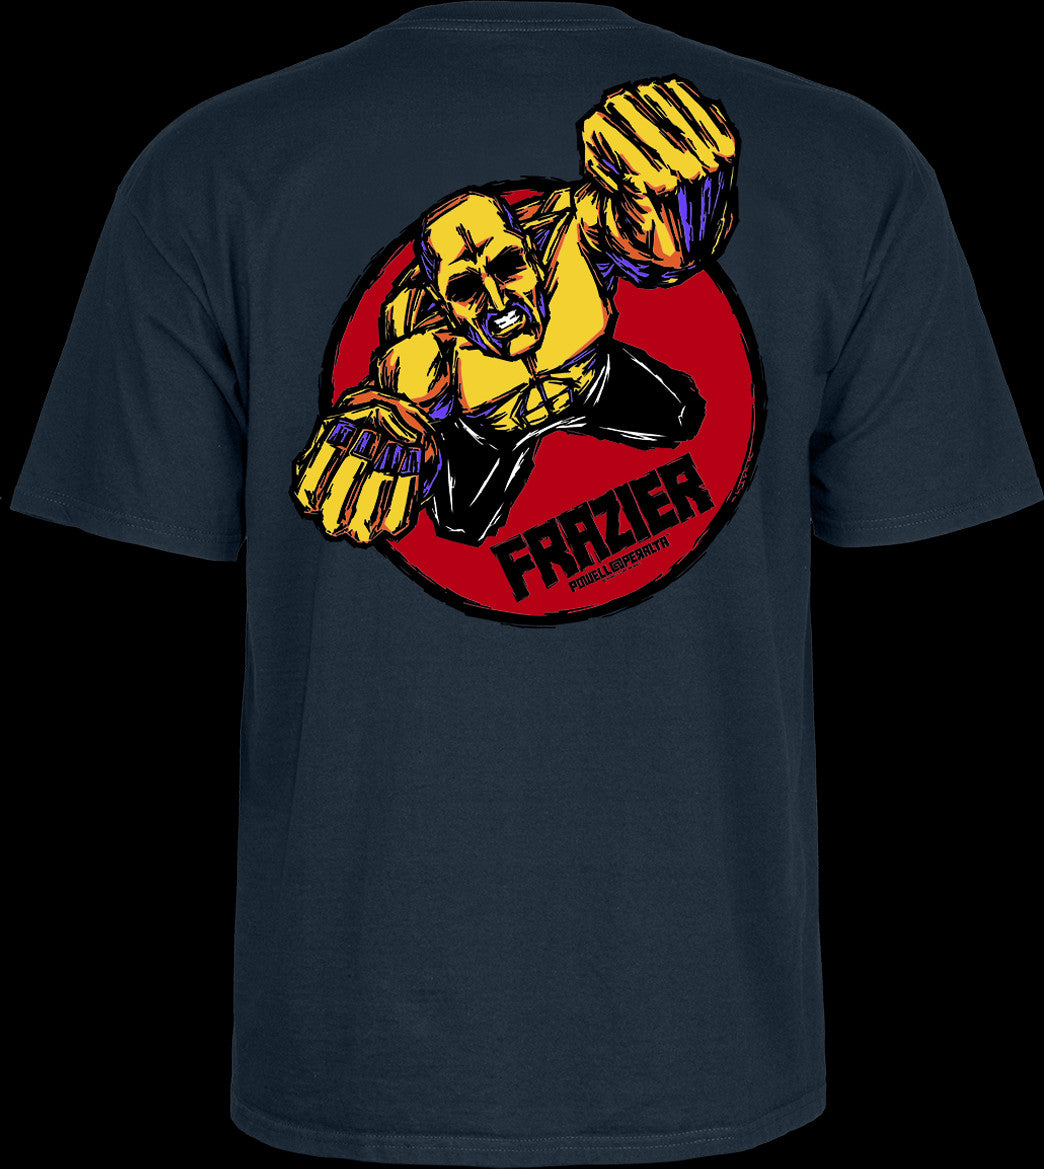 POWELL PERALTA - MIKE FRAZIER YELLOW MAN TEE - NAVY